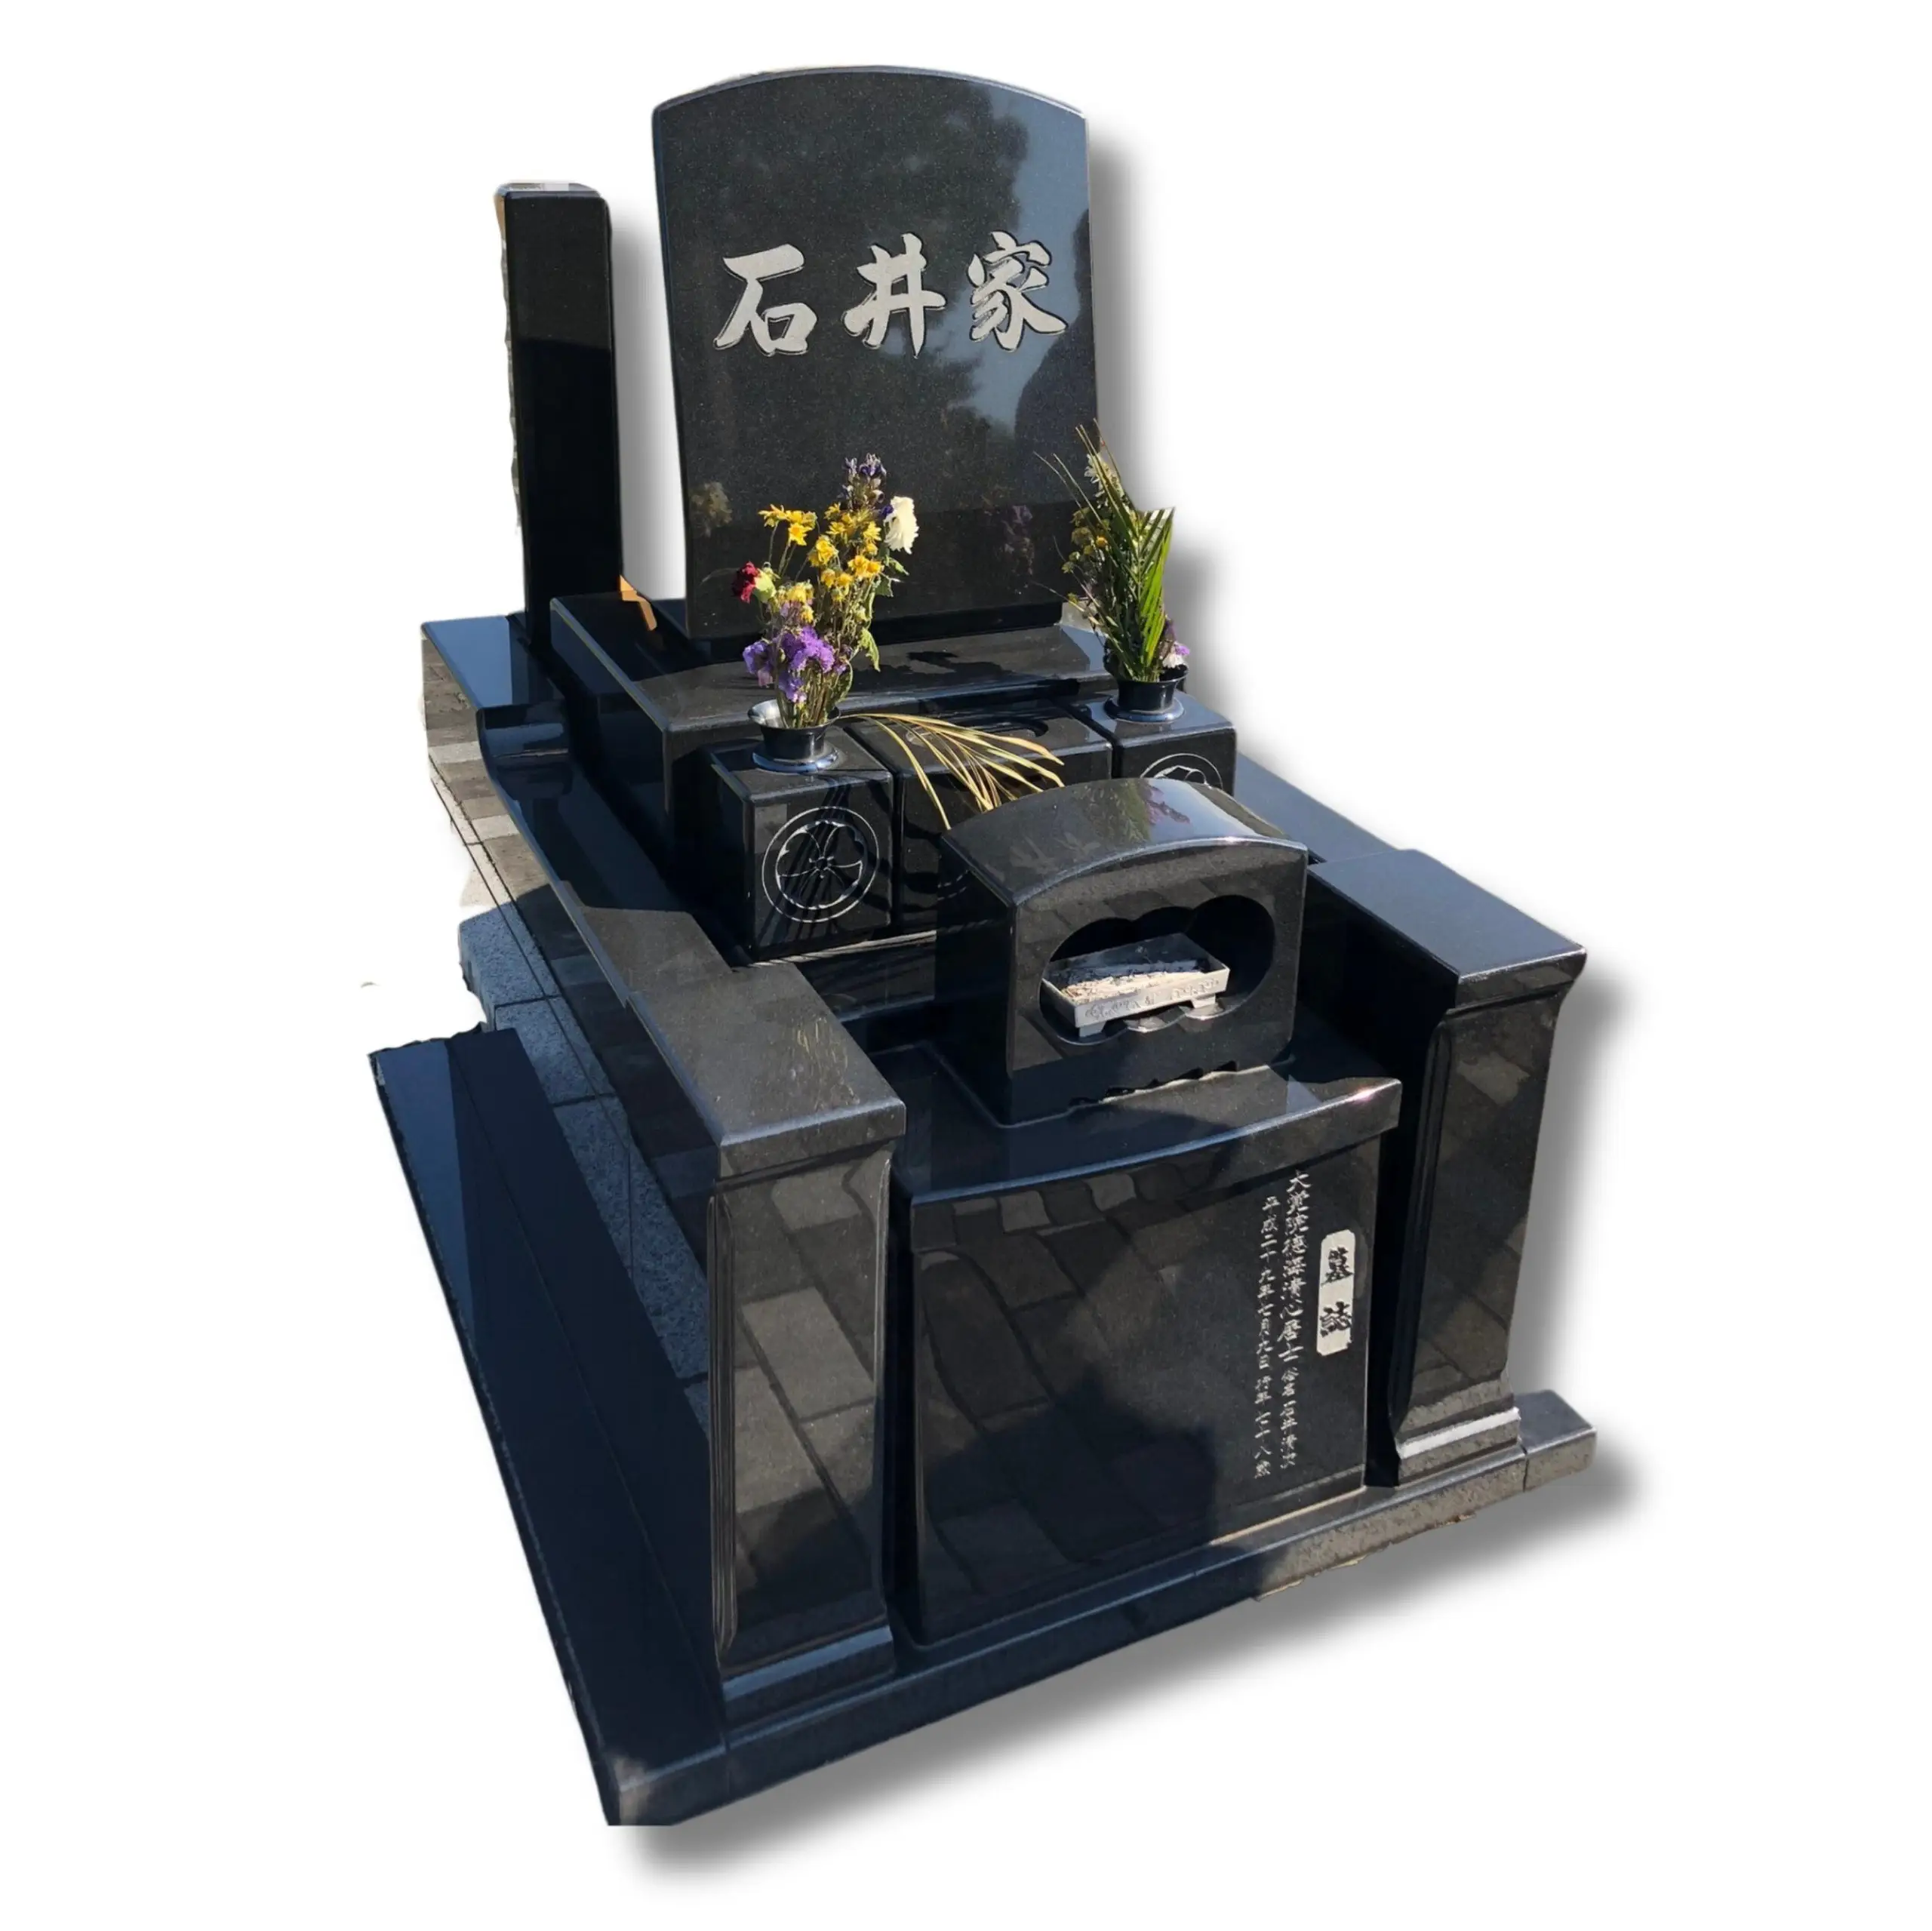 Cheap Price Granite Monuments Tombstone Grave Stone from Vietnam, TOP Products Tombstone Flower Pots, ireland headstones usa